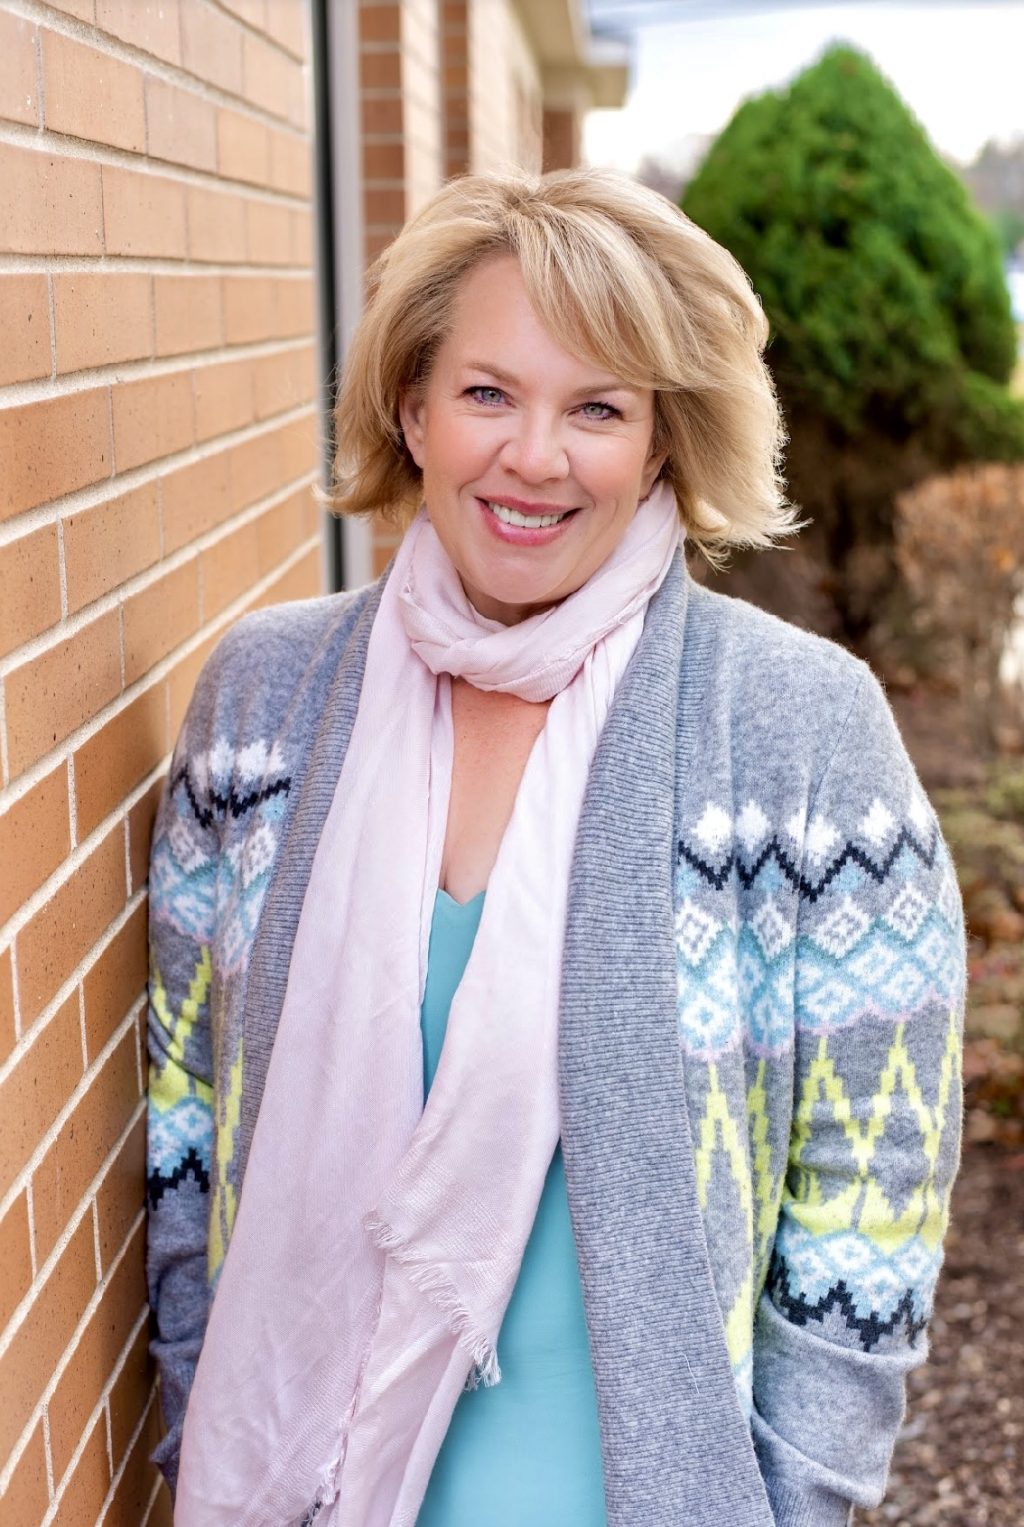 Woman with short blonde hair and a colorful sweater smiling next to a brick wall